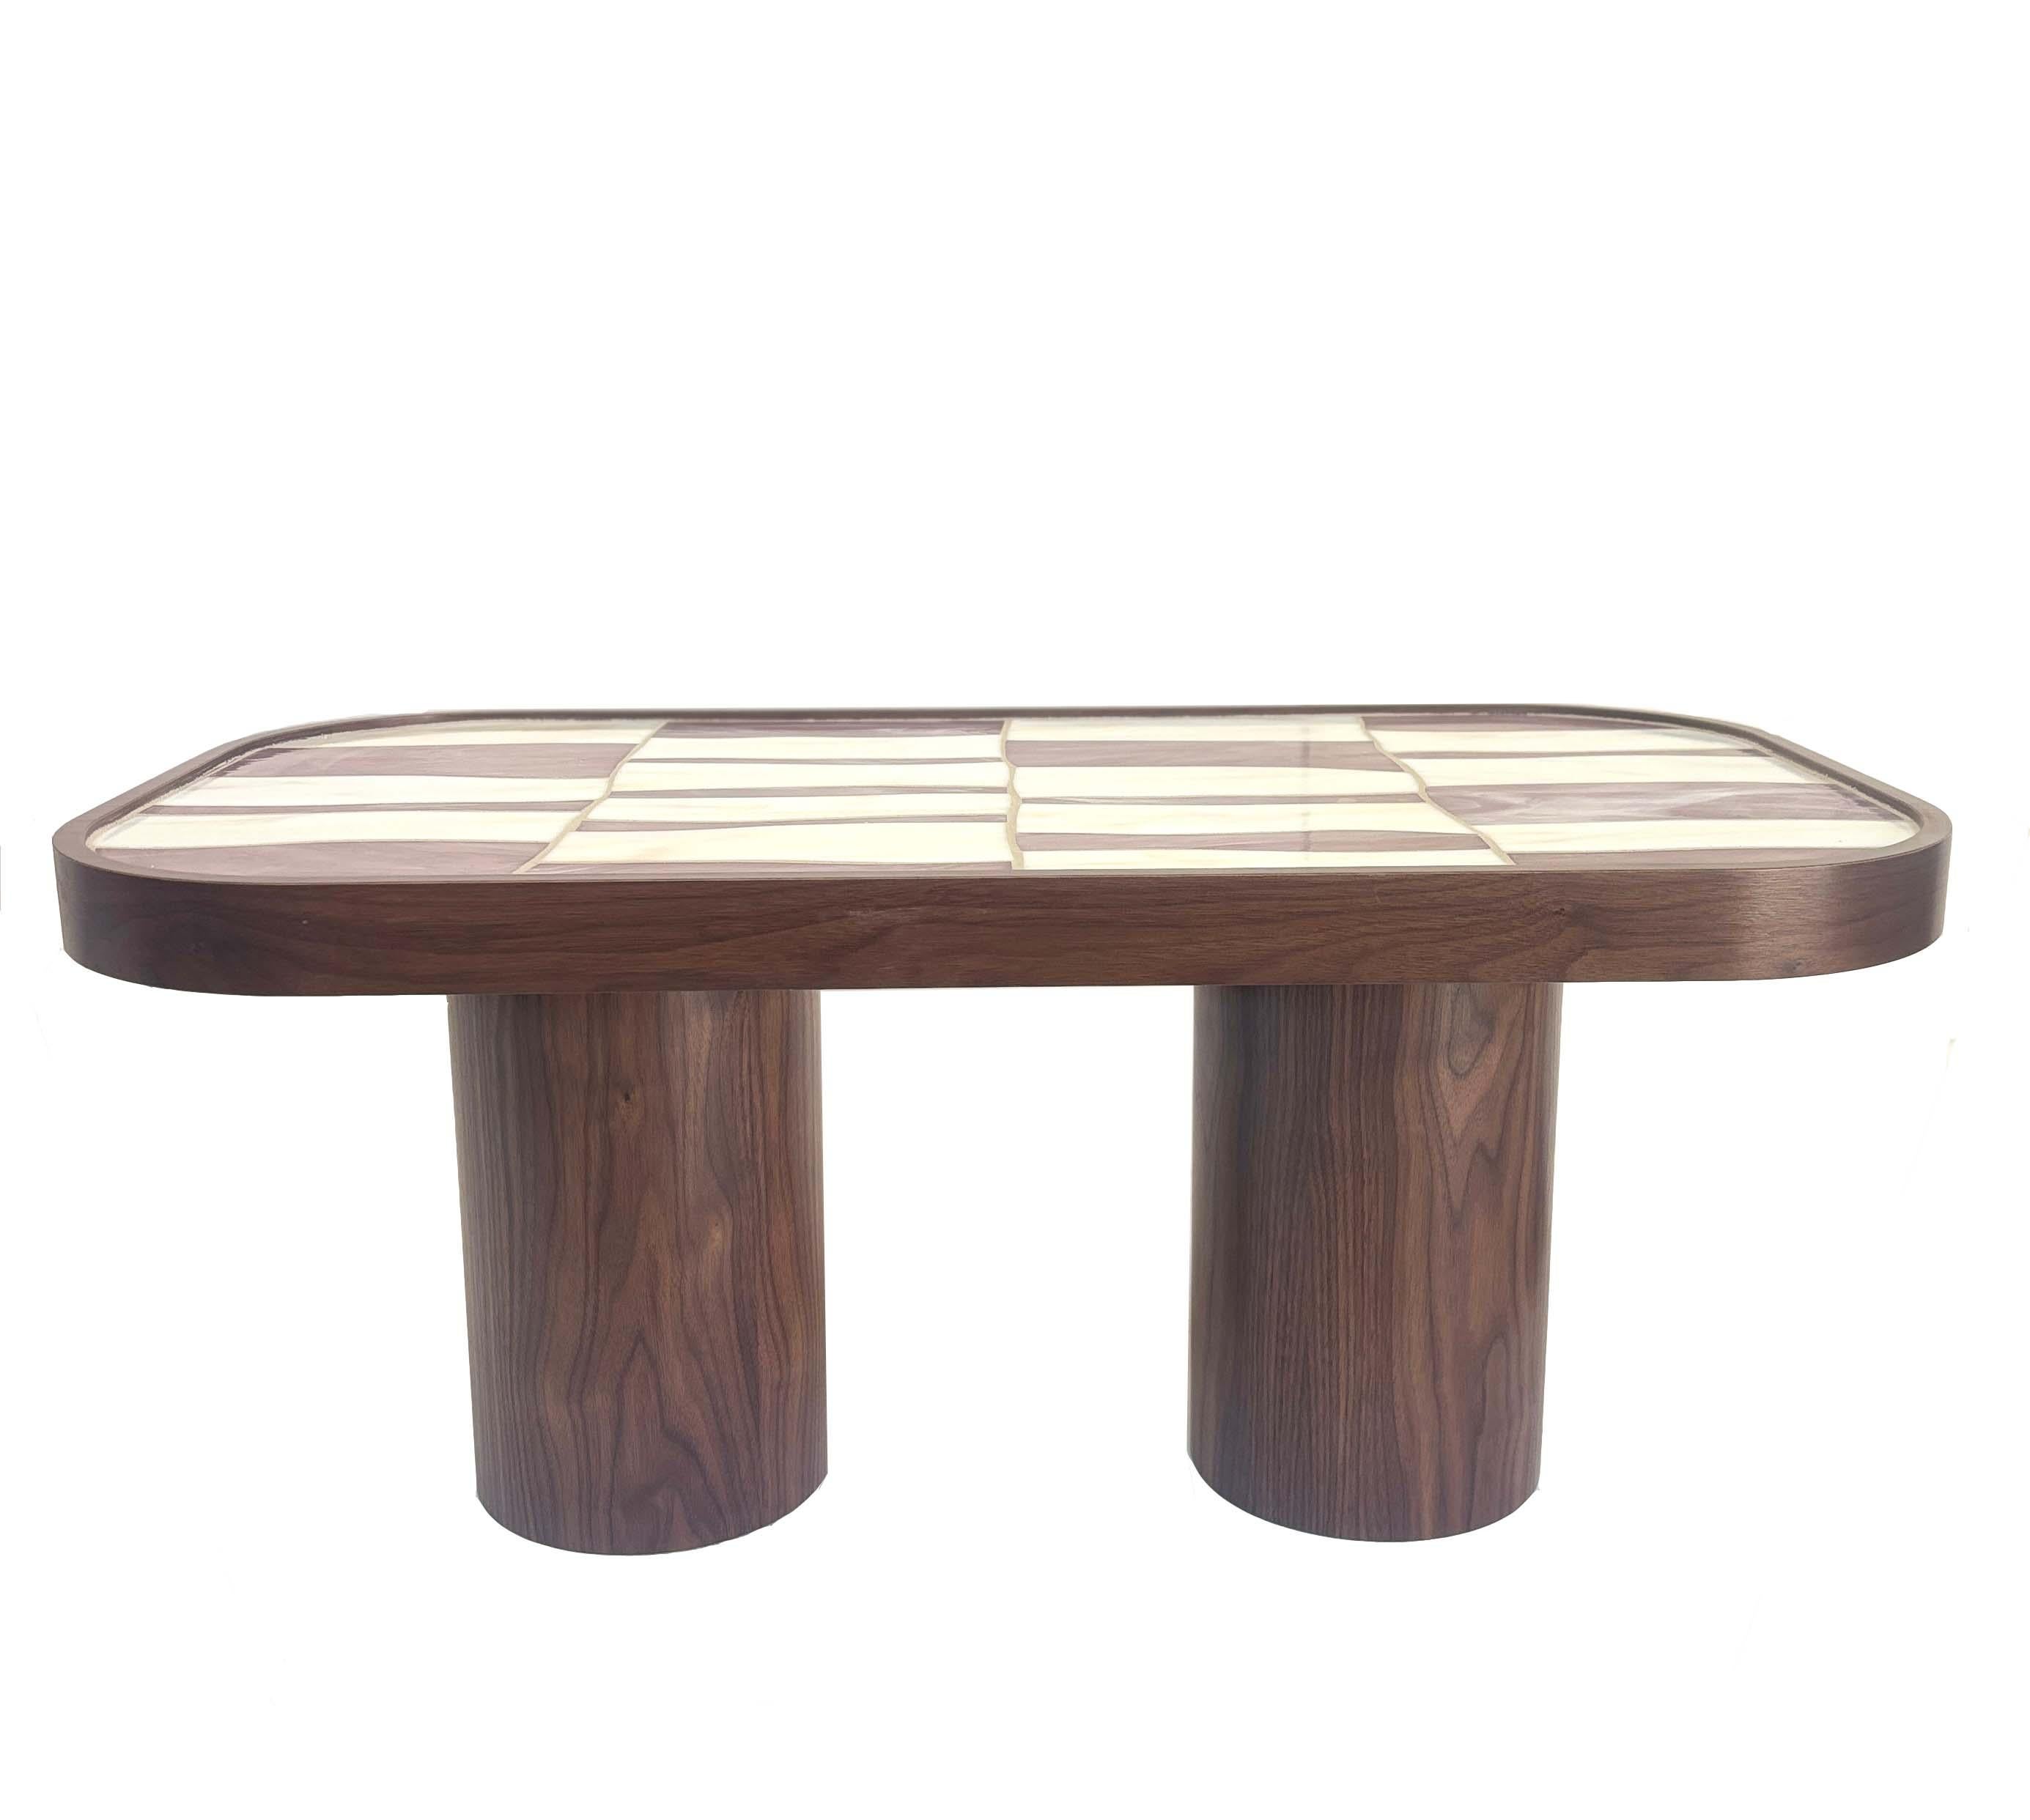 Palazzo oval coffee table with Ivory and Lavender glass sits on 2 Walnut Wood pedestals by Ercole Home. A sleek table with high craftsmanship and flowing mosaic patterns. Skillfully executed by Ercole's team of mosaic artists.

Part of the Palazzo